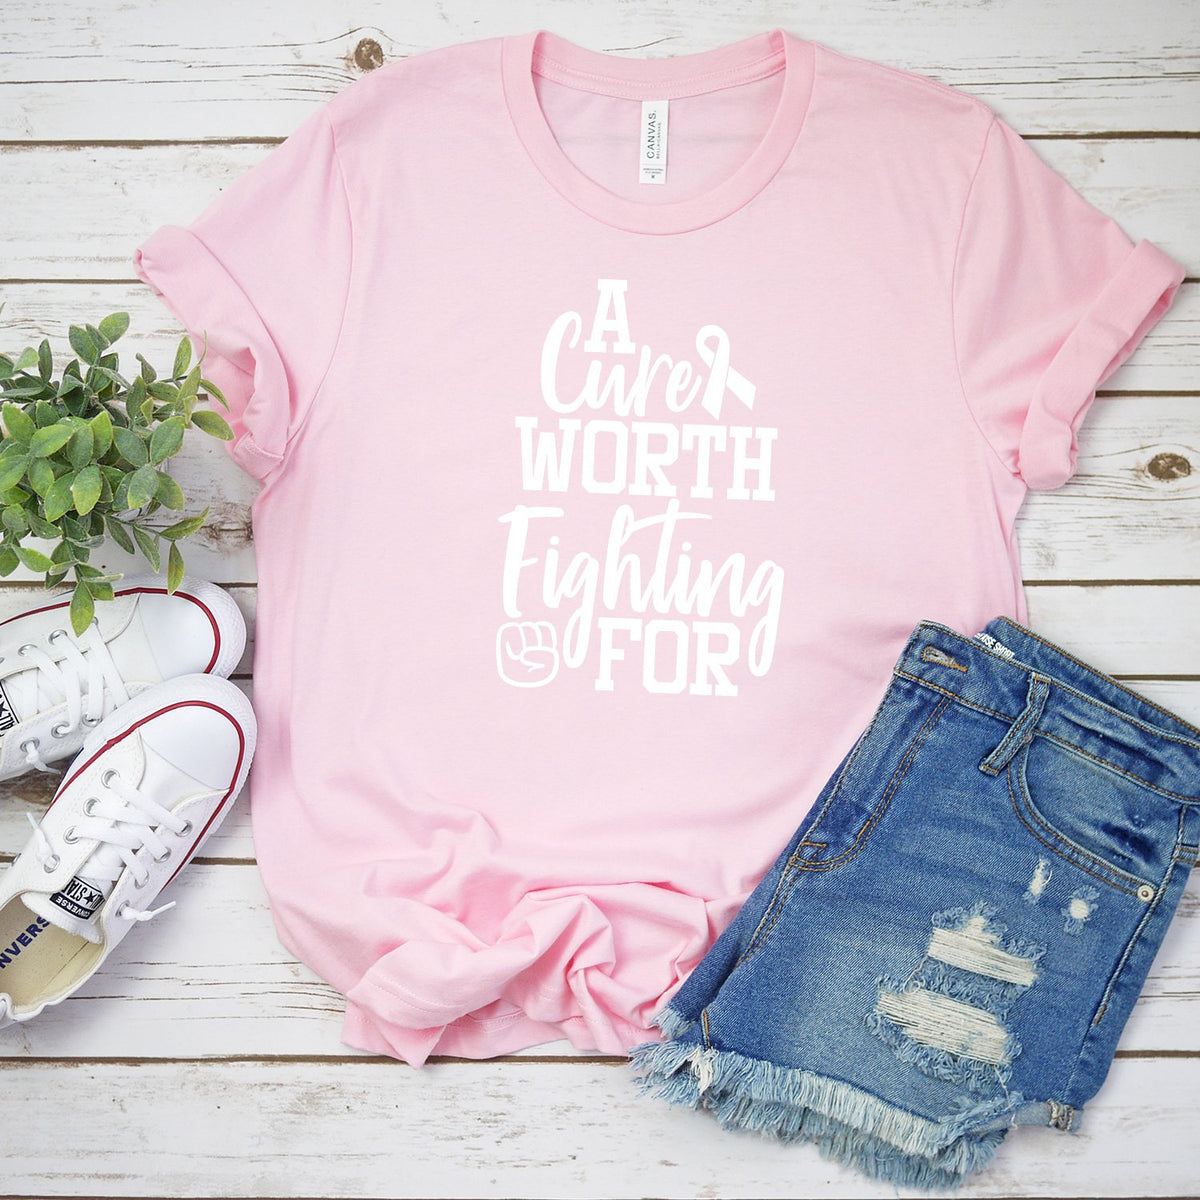 A Cure Worth Fighting For - Short Sleeve Tee Shirt